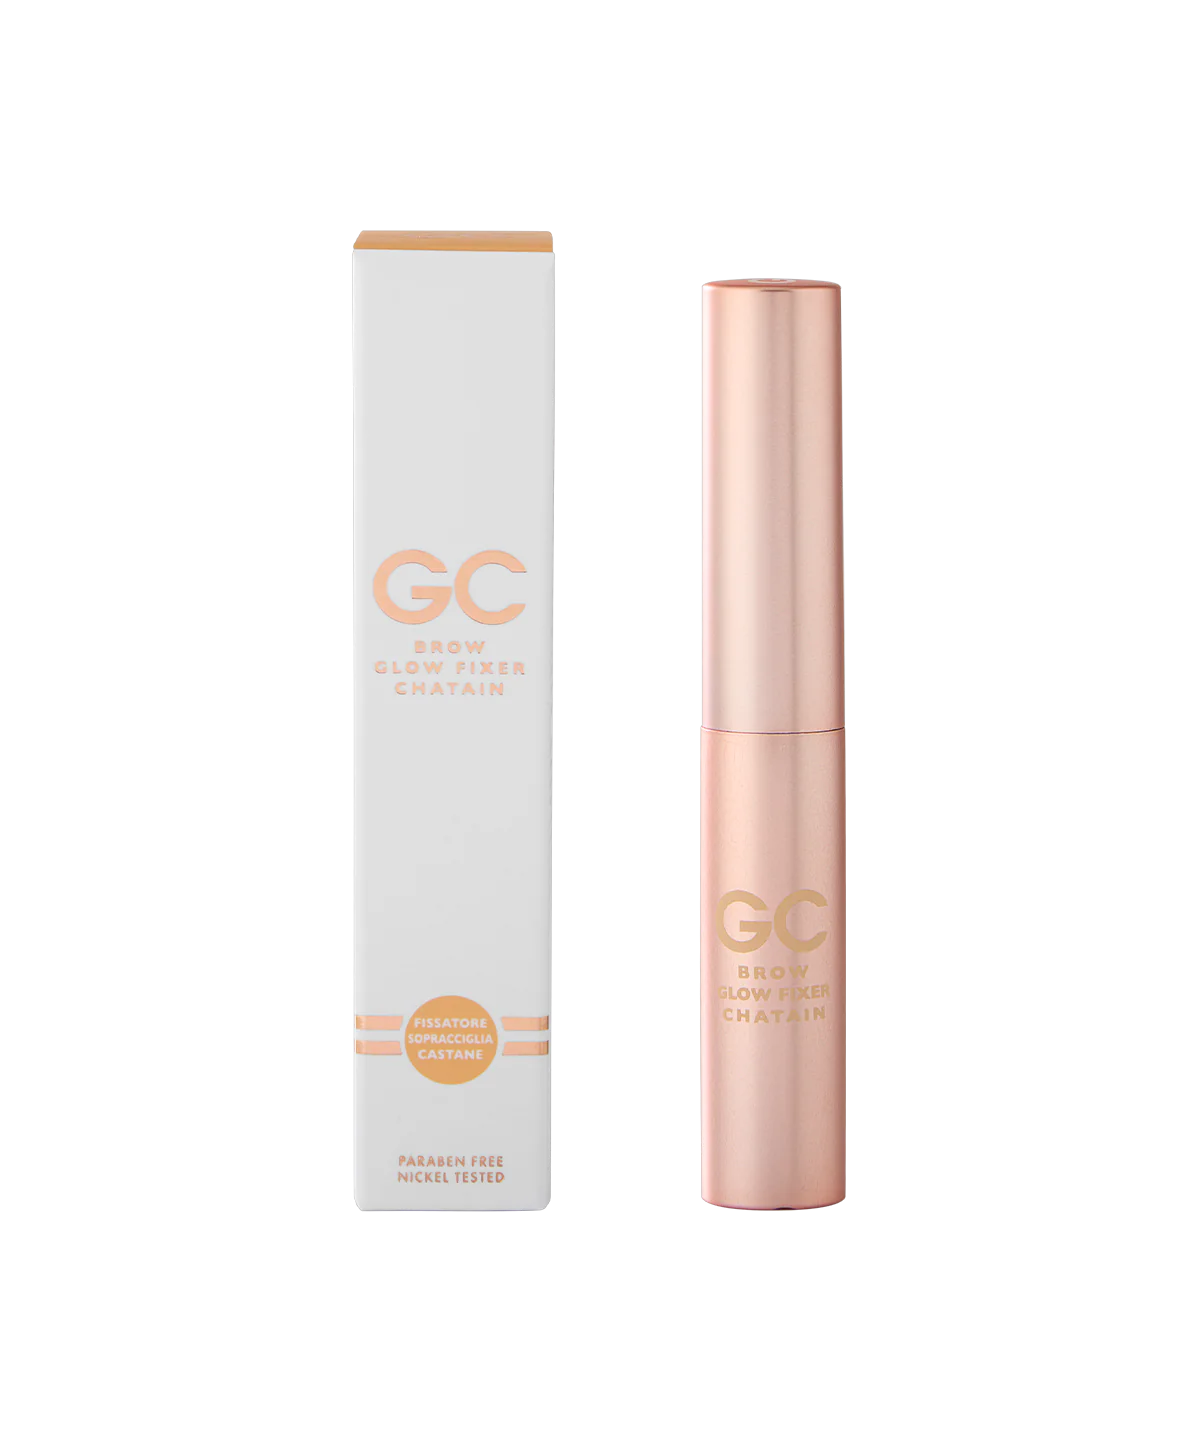 Gil Cagnè Brow Glow Fixer Chatain